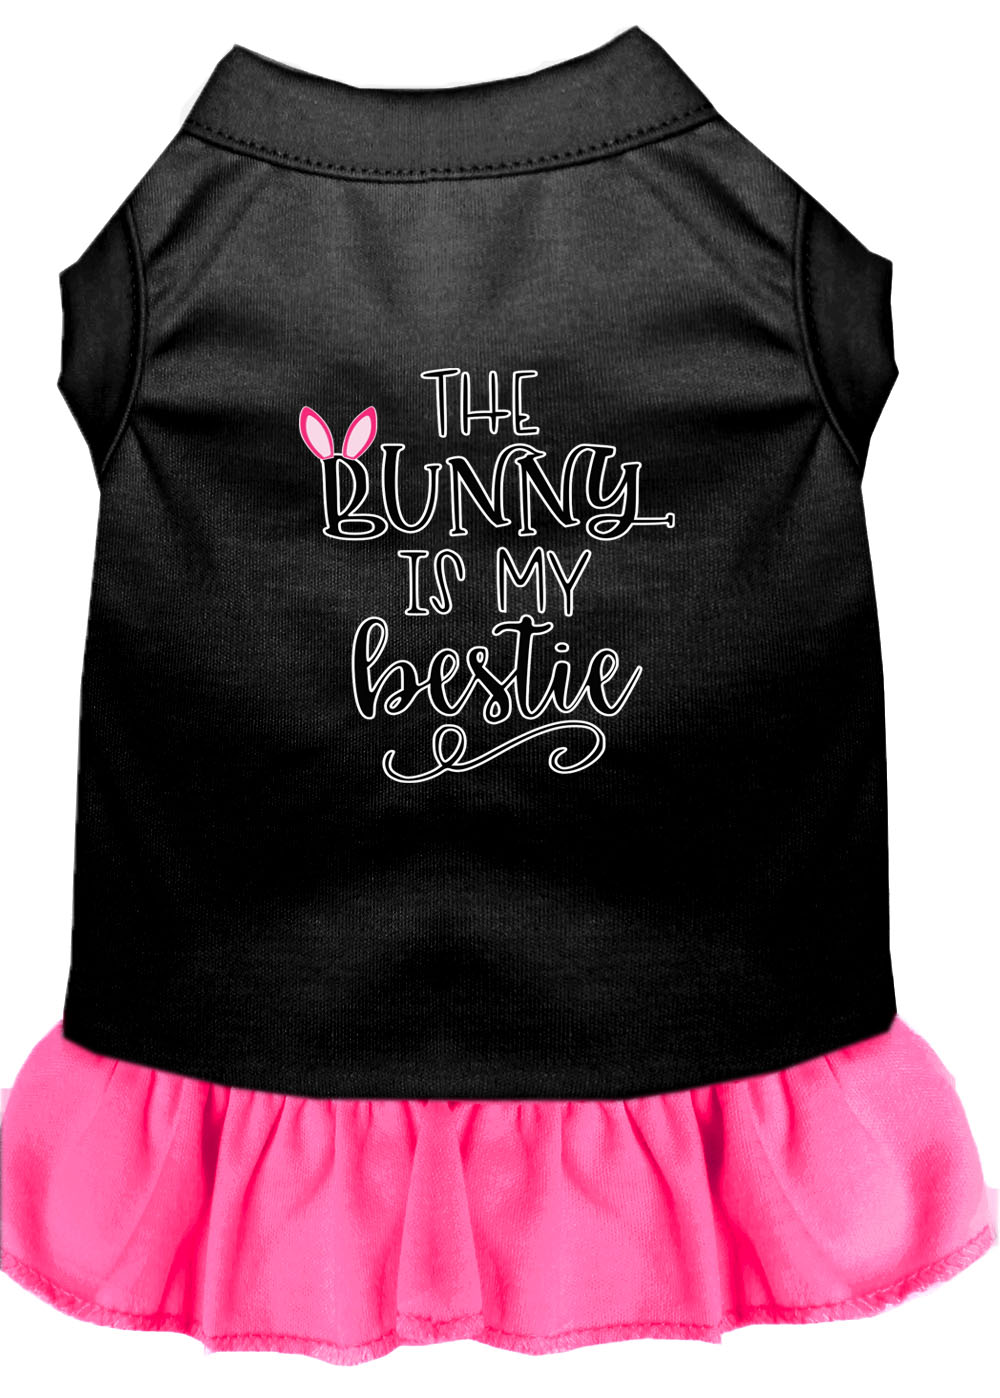 Bunny is my Bestie Screen Print Dog Dress Black with Bright Pink Med